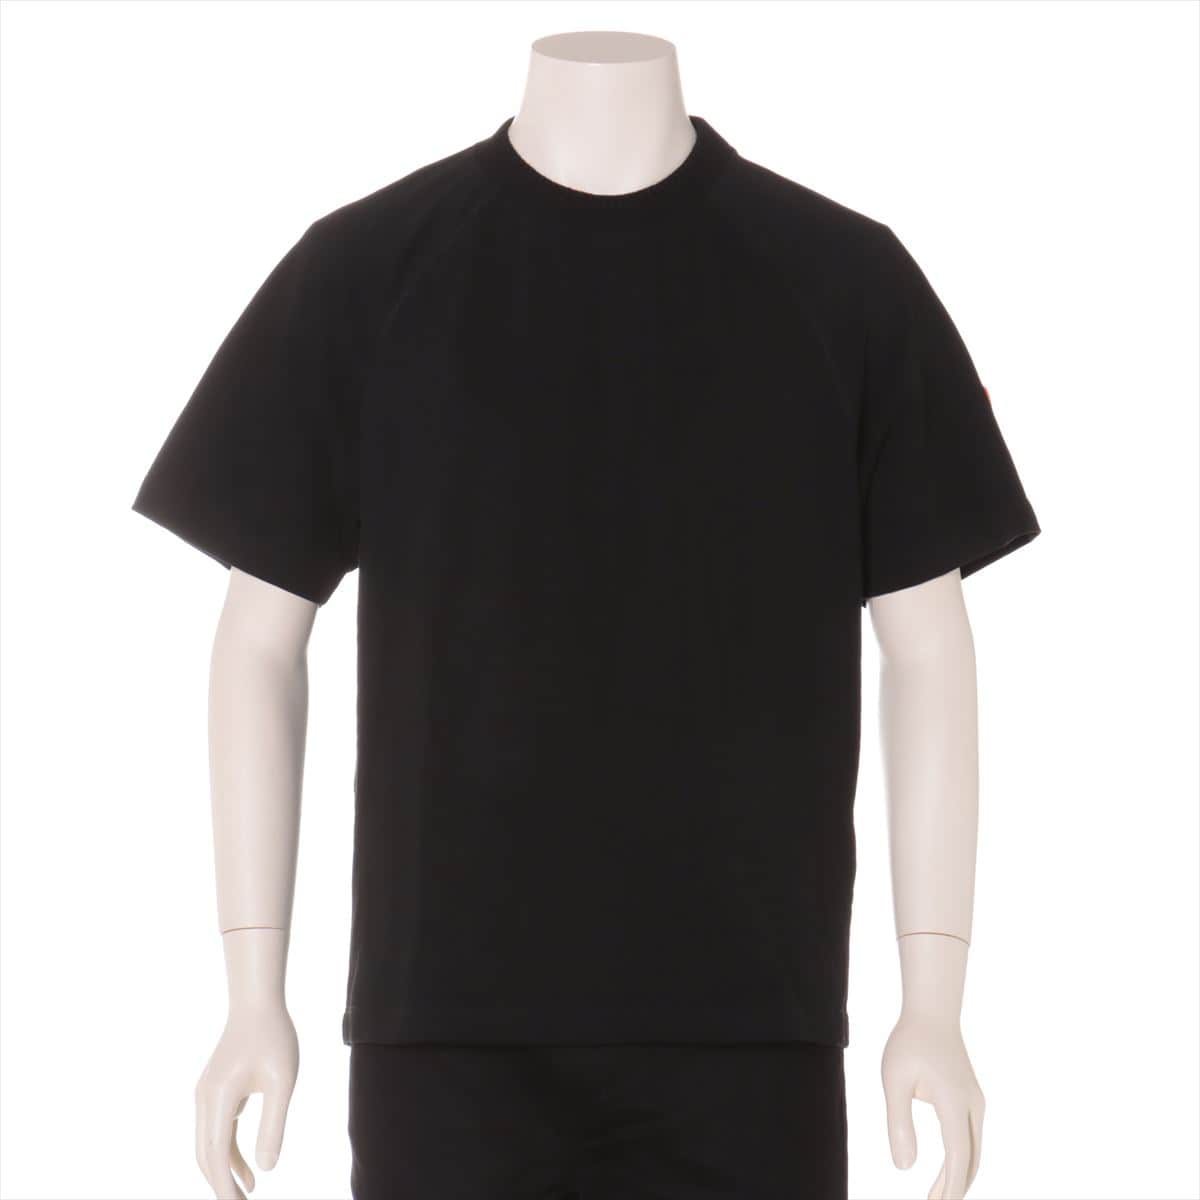 Moncler x Offwhite 16 years Cotton T-shirt S Men's Black  Back arrow arm with rubber logo patch